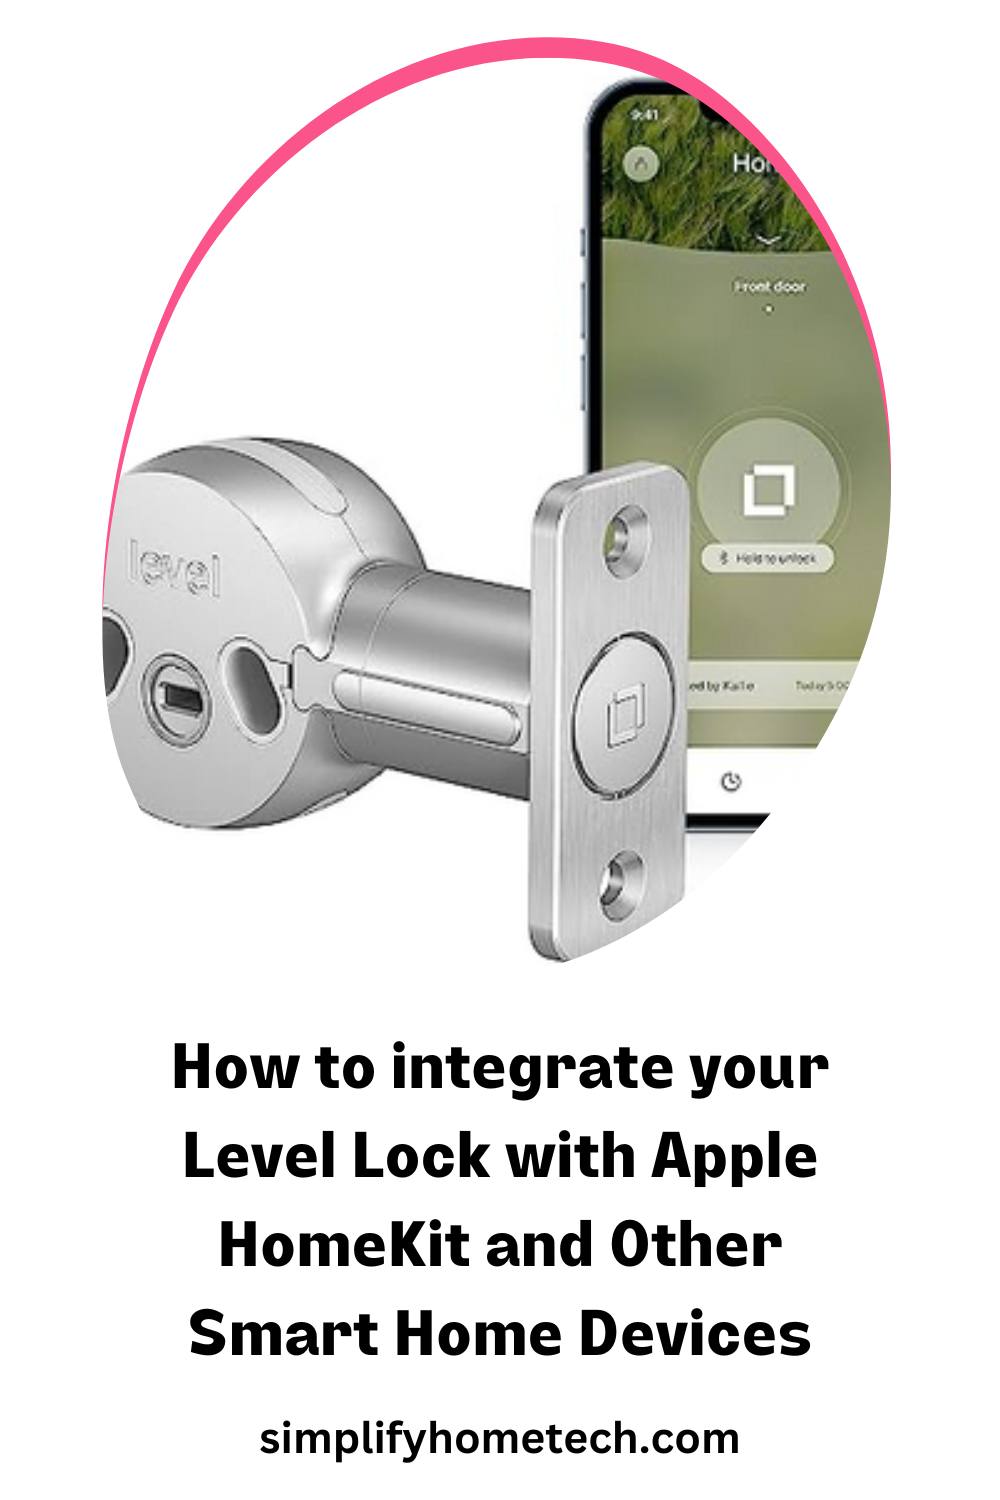 How to integrate your Level Lock with Apple HomeKit and Other Smart Home Devices